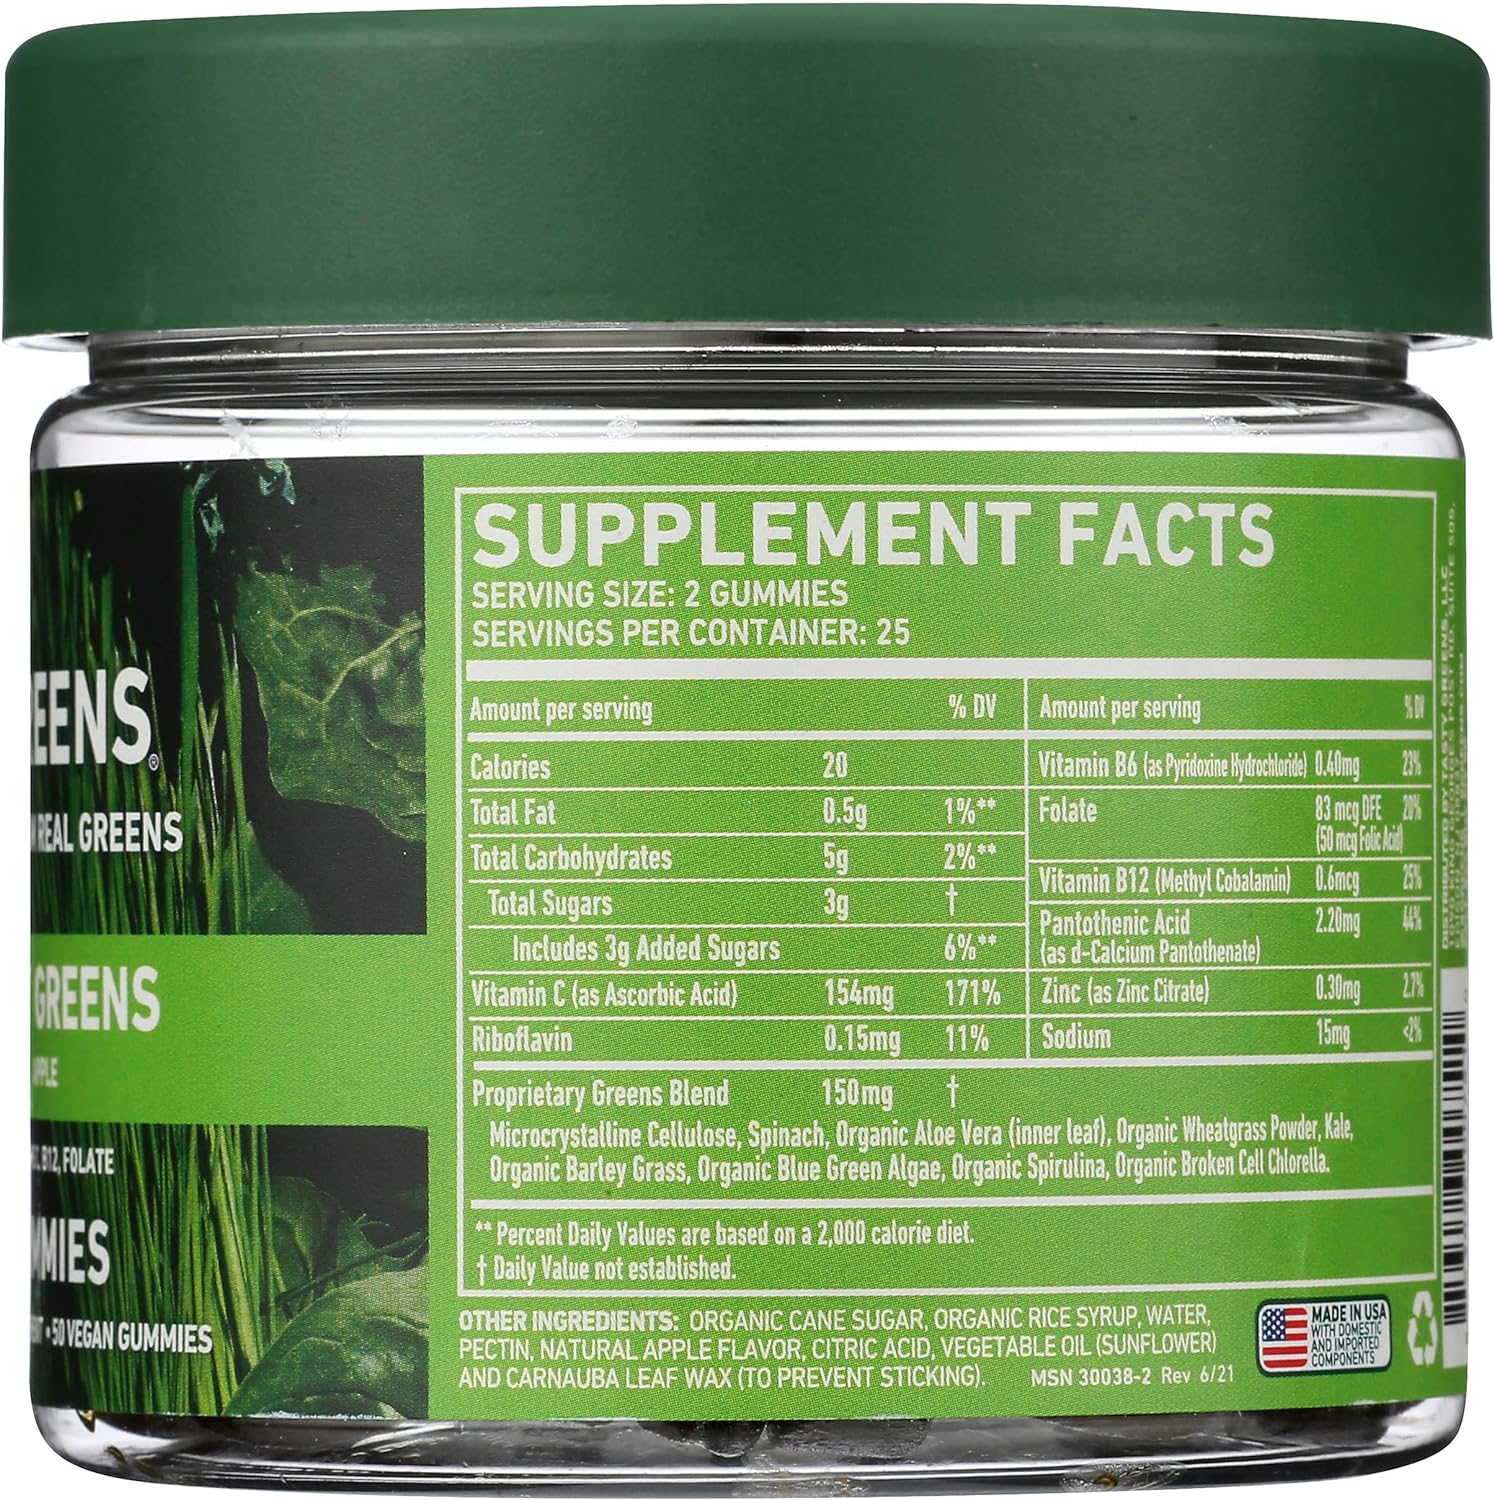 8Greens Daily Superfood Gummies | Immune Booster, High in Antioxidants | Apple | 50 count